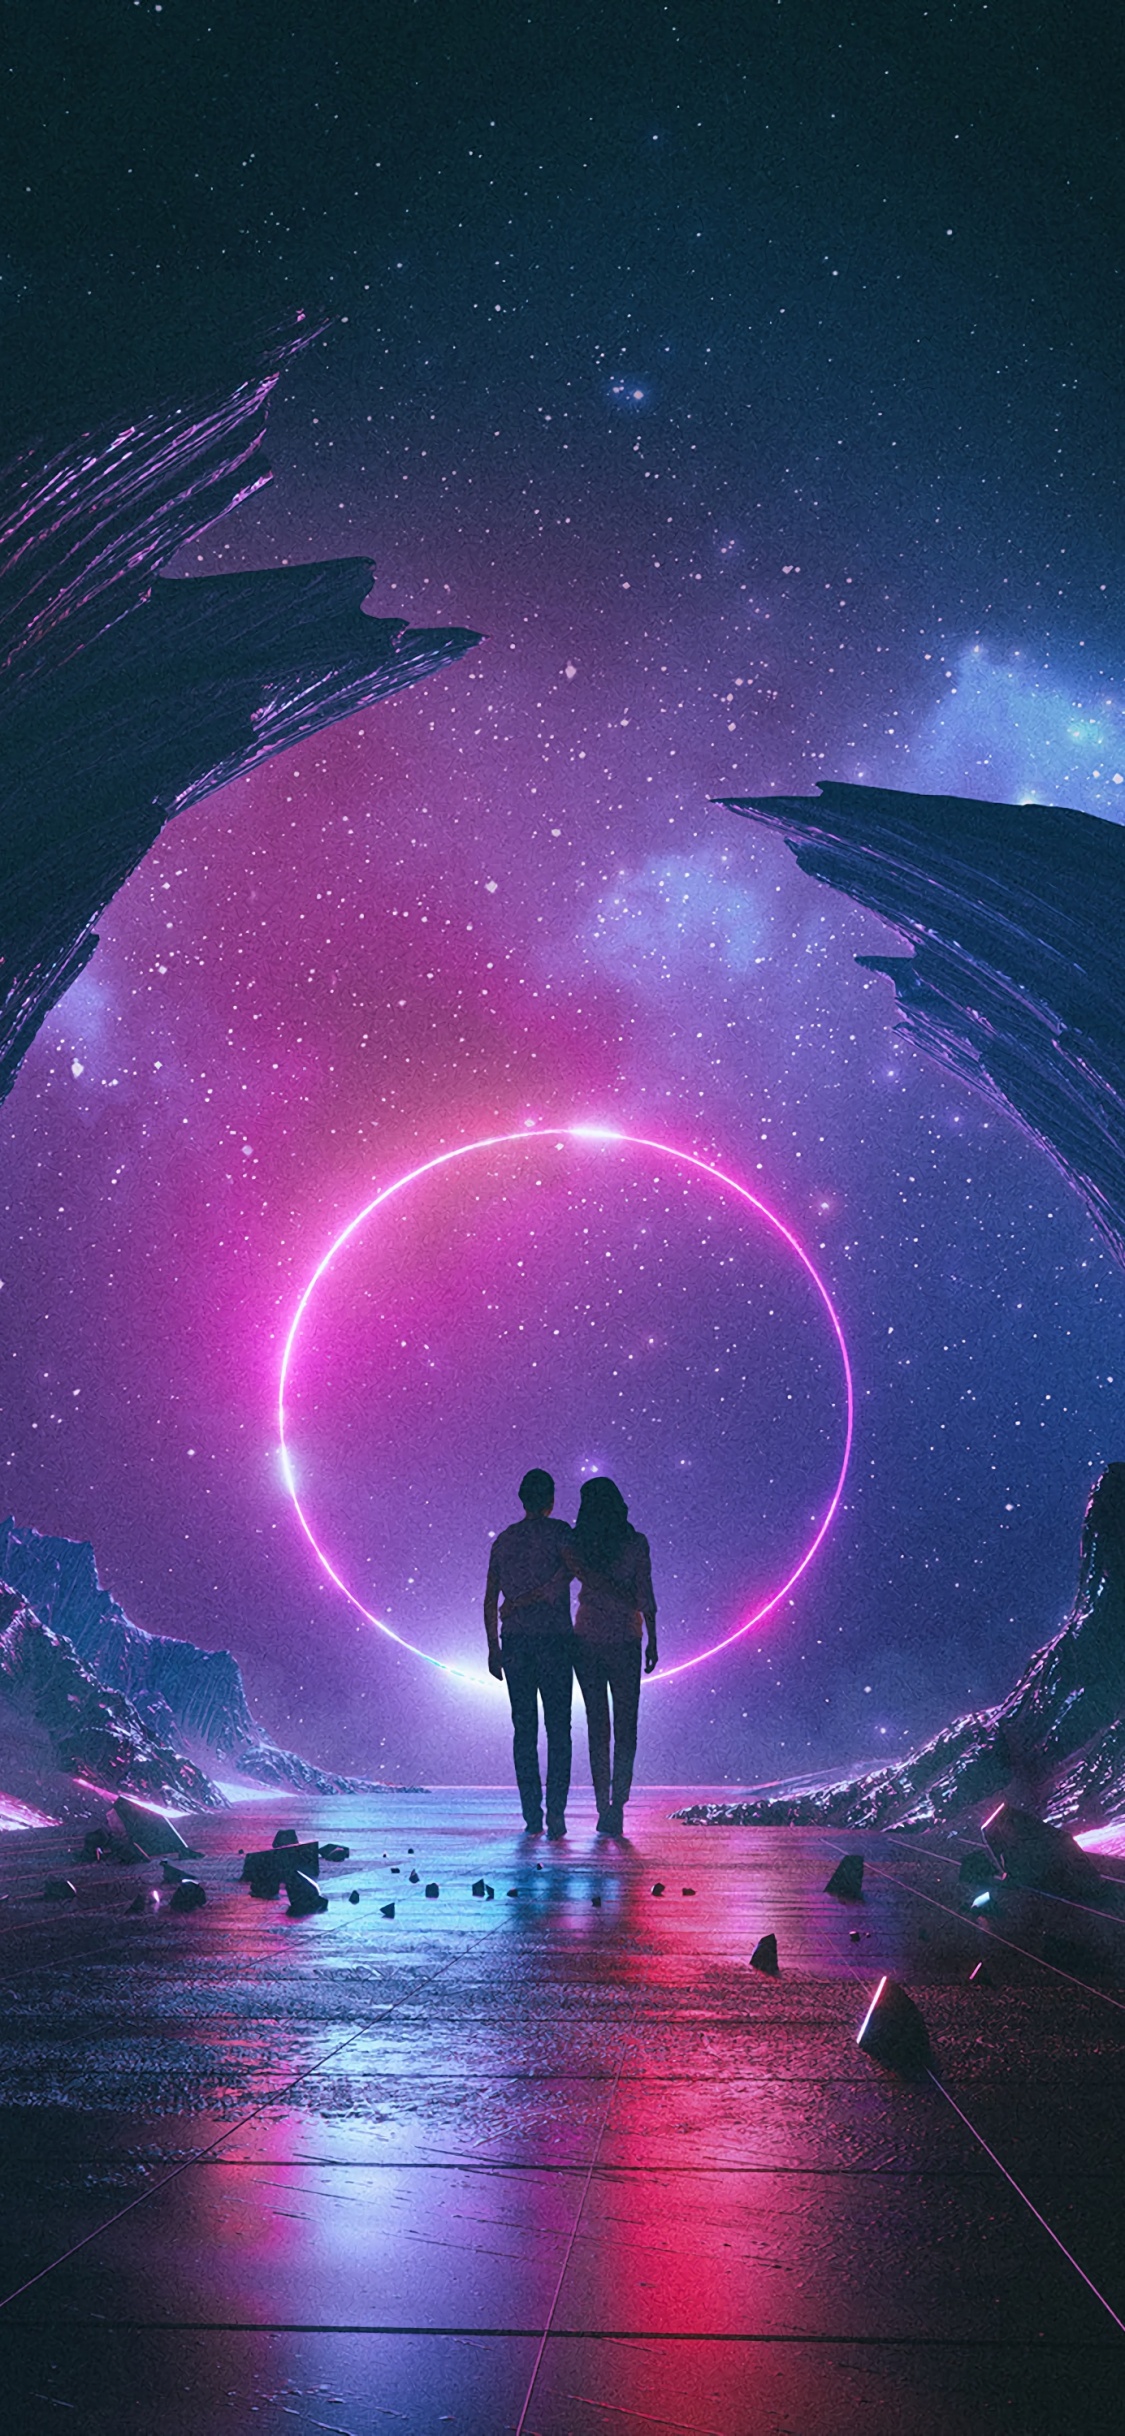 Silhouette of 2 Person Standing on The Ground Under Starry Night. Wallpaper in 1125x2436 Resolution